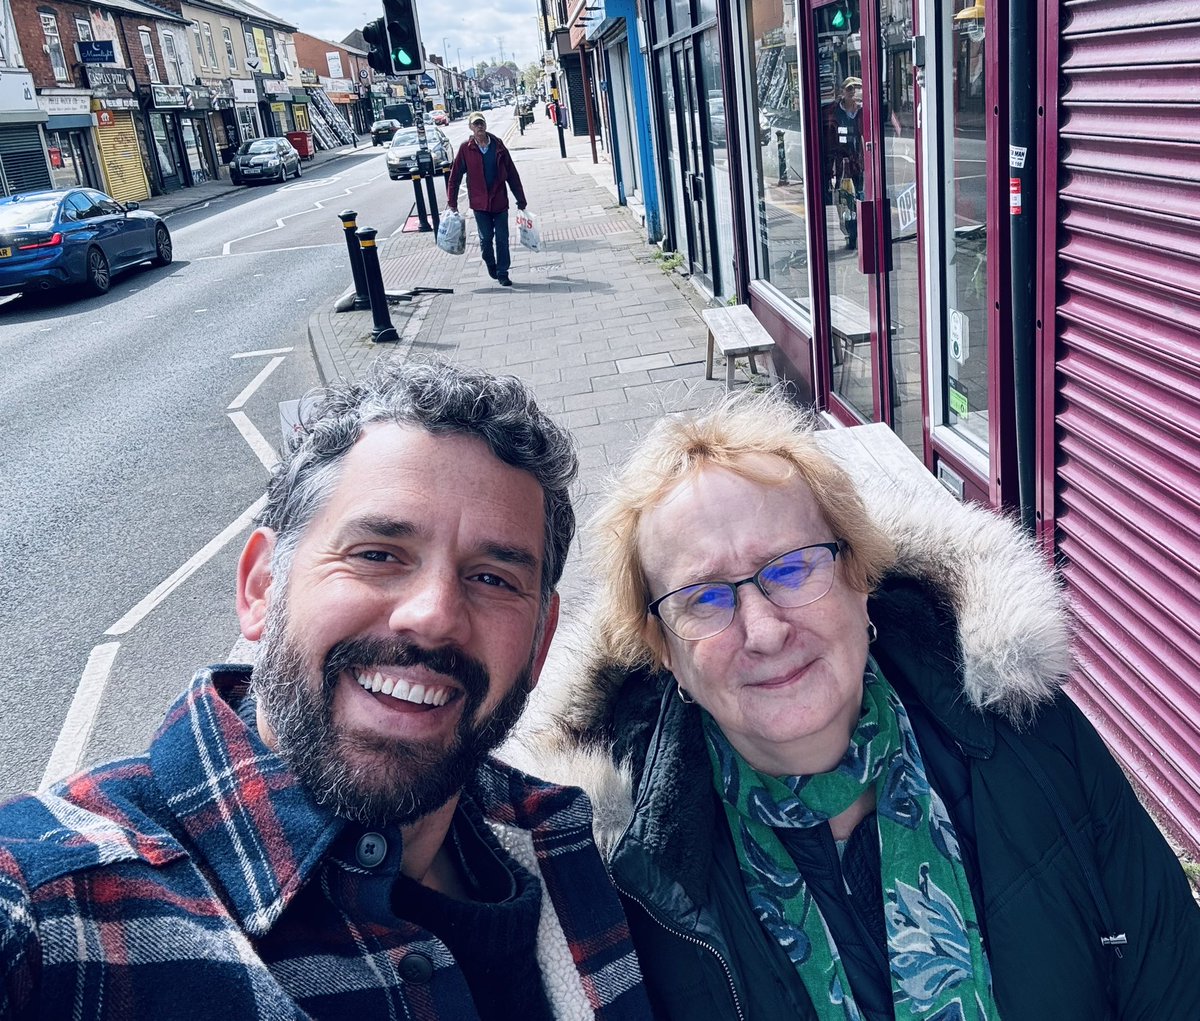 Some good chats with my mate Cllr @marylockelabour ❤️ in Stirchley, as we got out the message for West Midlands Mayor⭐️ candidate @RichParkerLab and Police & Crime Commissioner👮‍♂️ @SimonFosterPCC for 2nd May🗳️